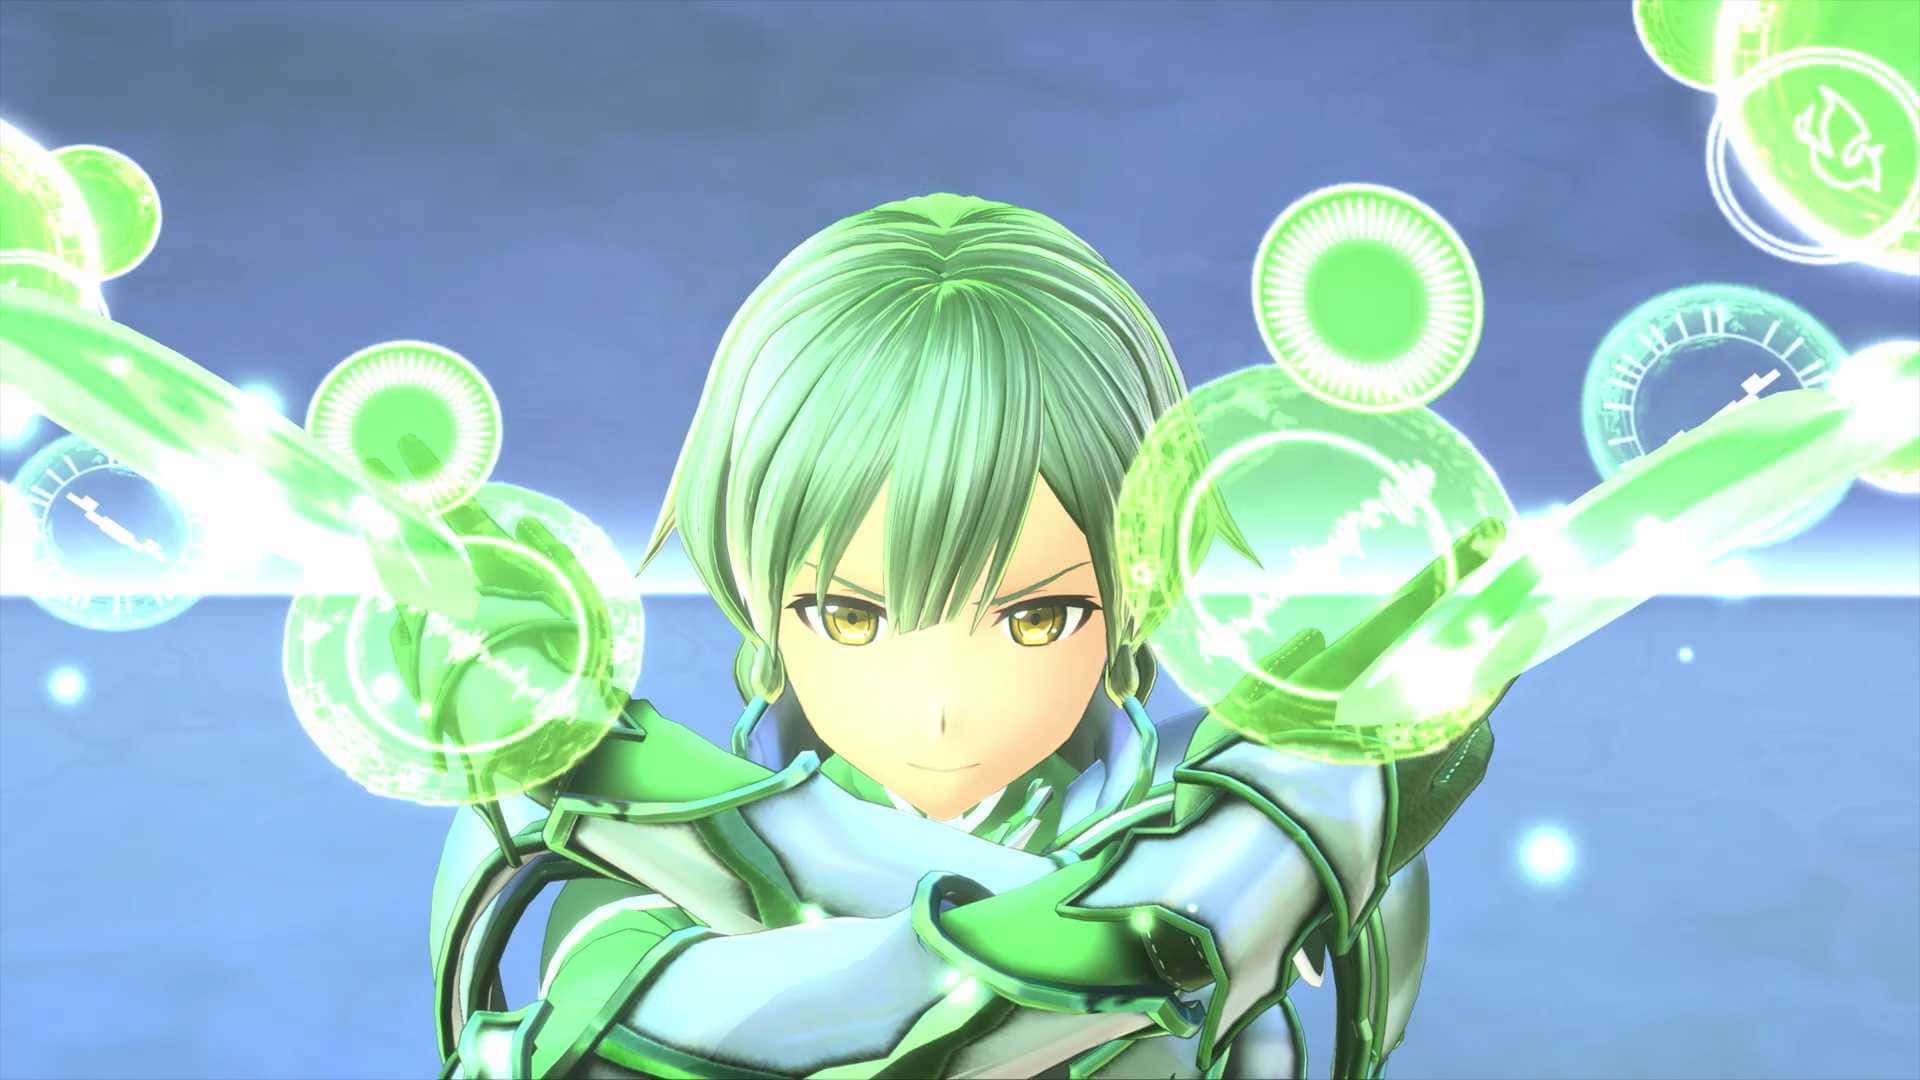 A Green Anime Character Holding A Green Sword